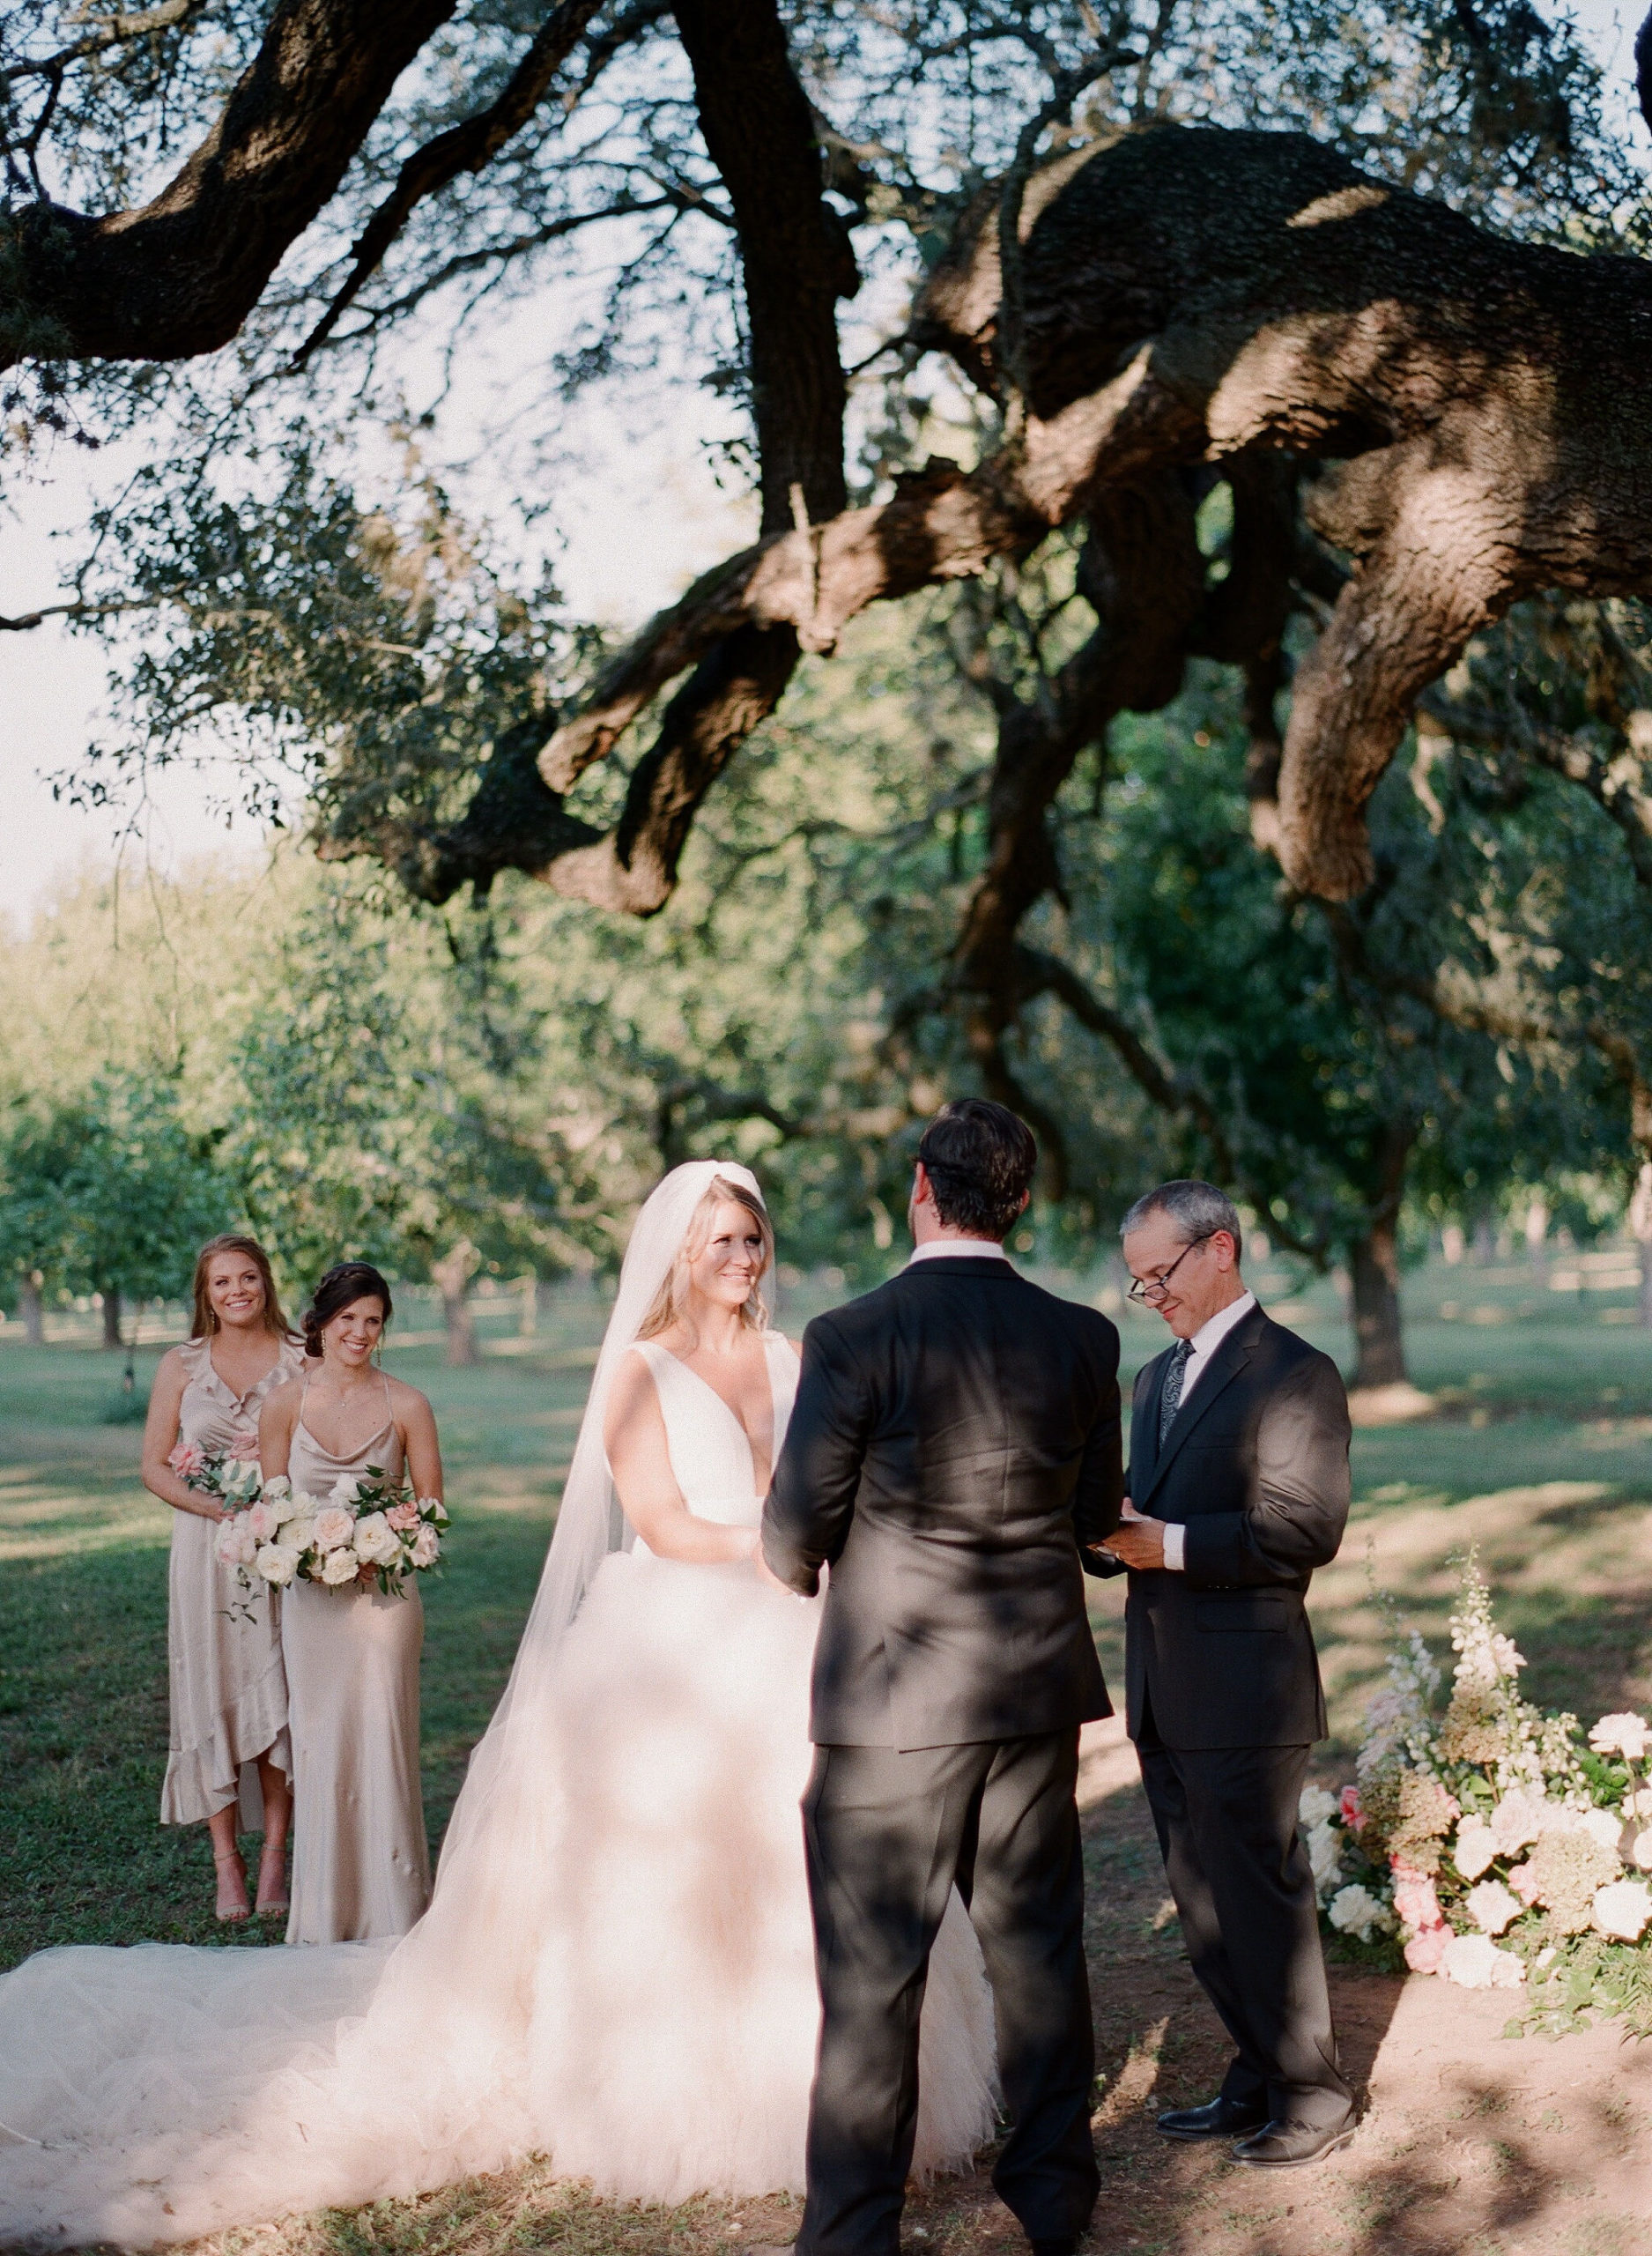 Texas Private Estate Wedding During Covid BW Theory Matthew Moore Photography 19.jpg